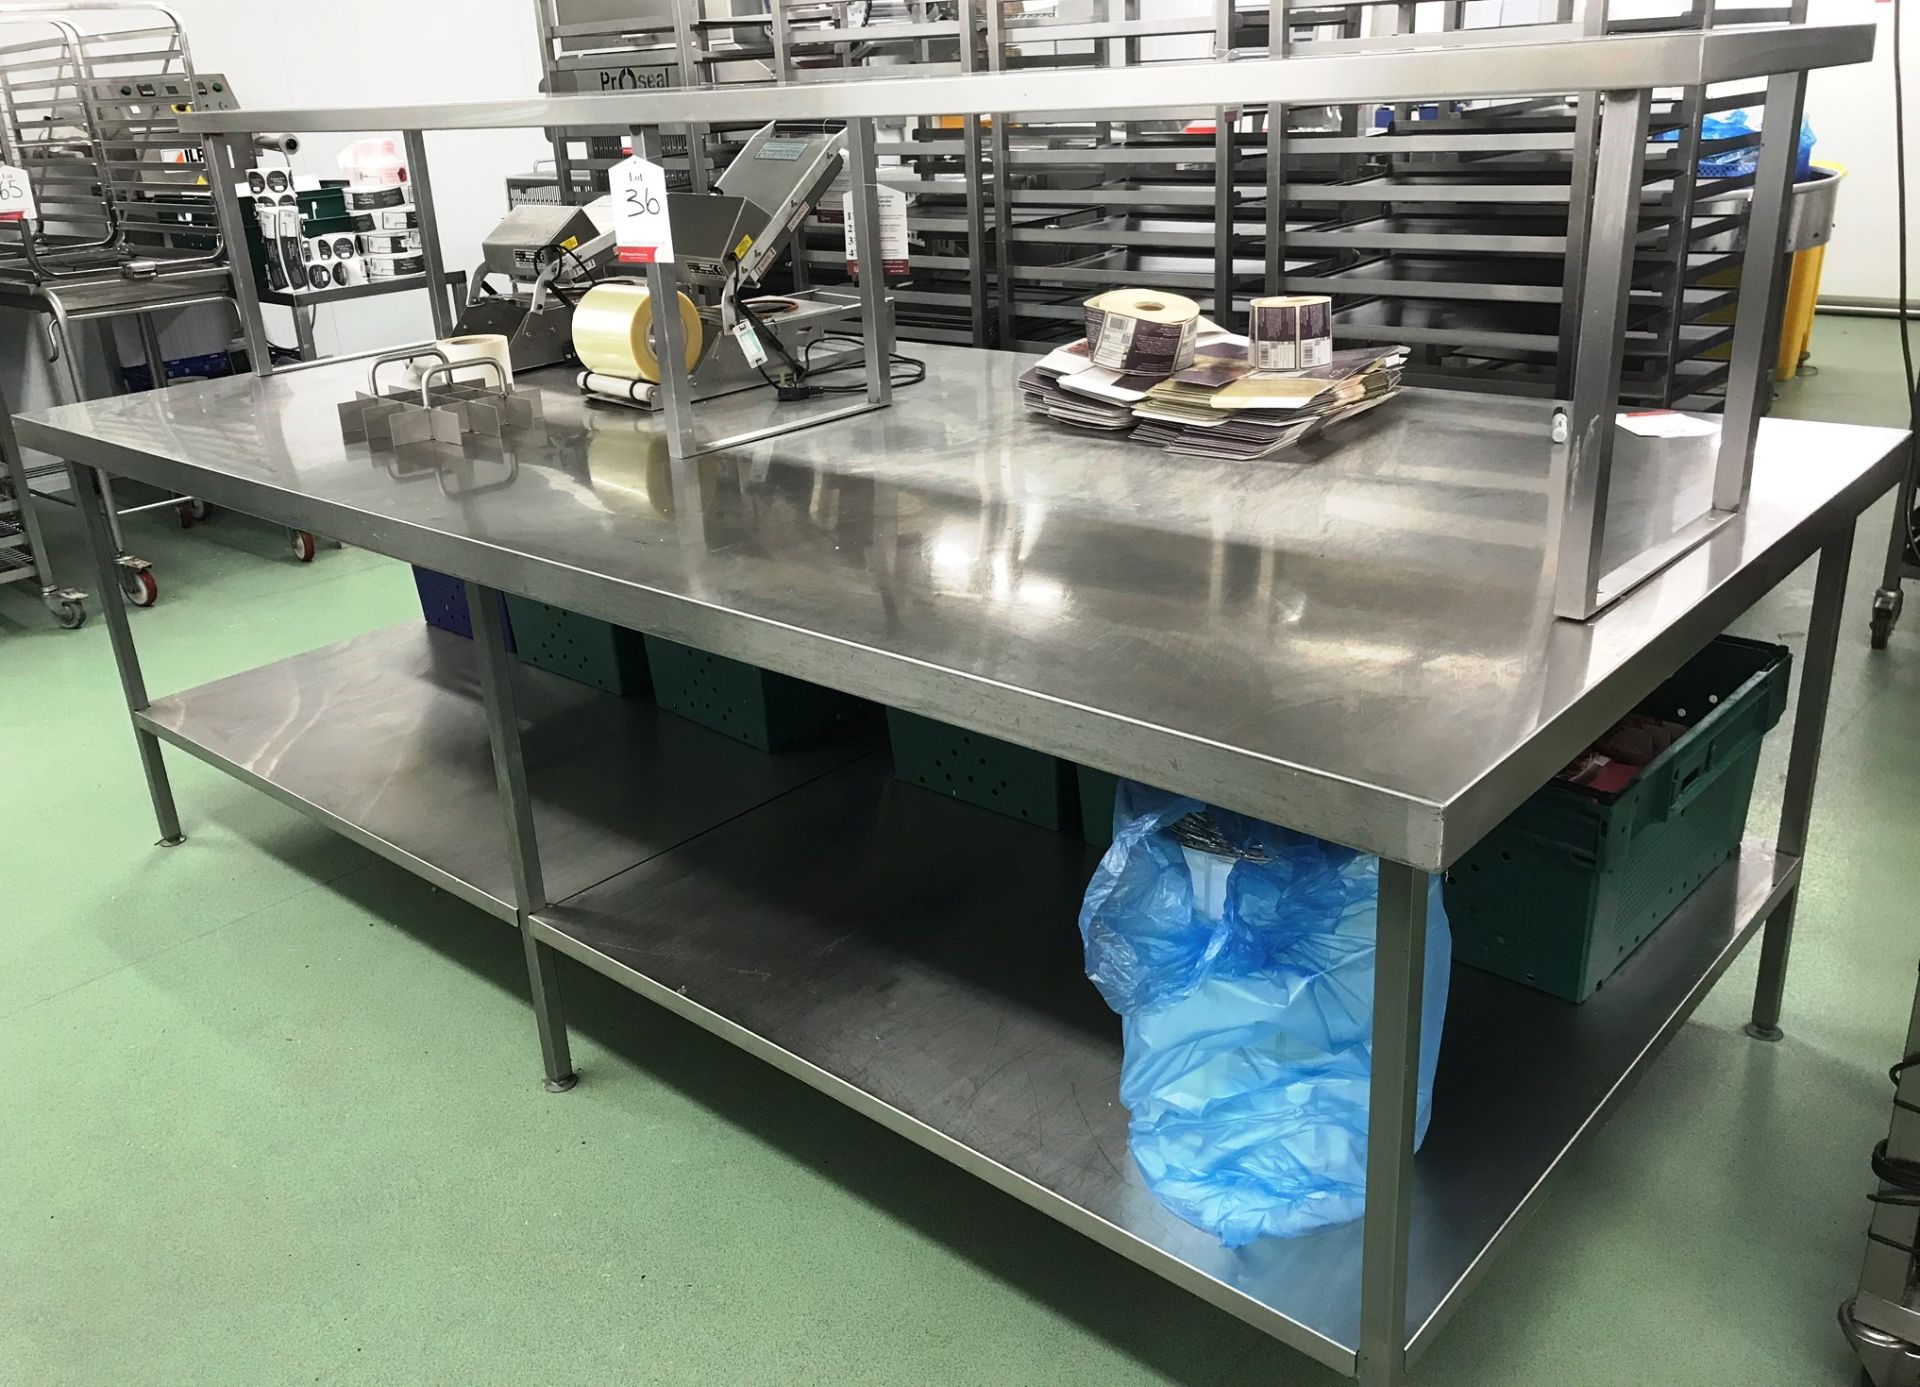 Stainless Steel Preparation Table w/ Gantry & Undershelf - 2850mm Length | CONTENTS NOT INCLUDED - Image 2 of 2